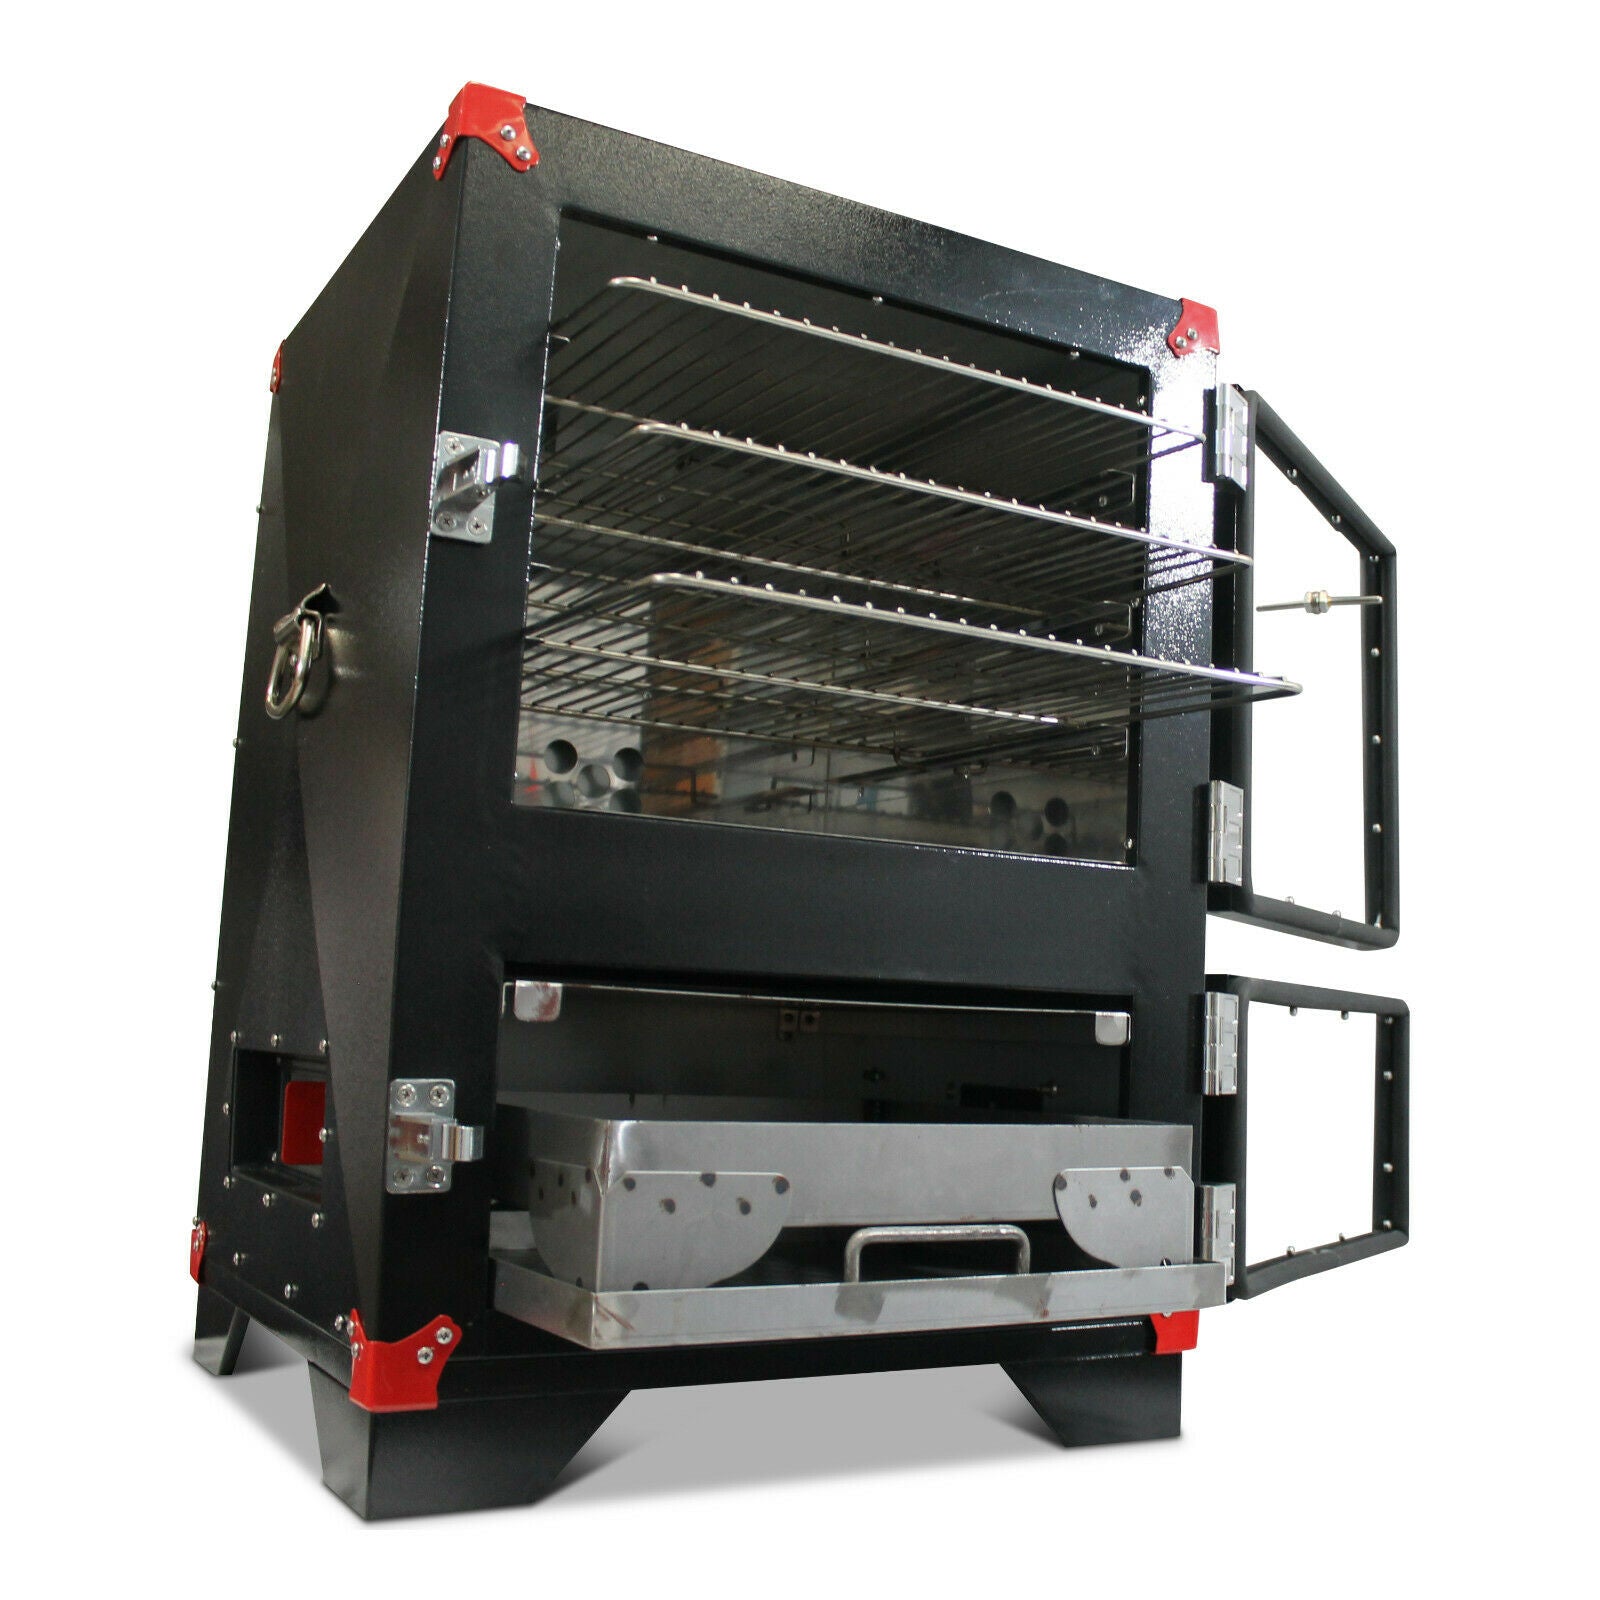 The Big Woods Smoker: Your Personal Competition Charcoal Cabinet Smoker - Big Wood Cooking